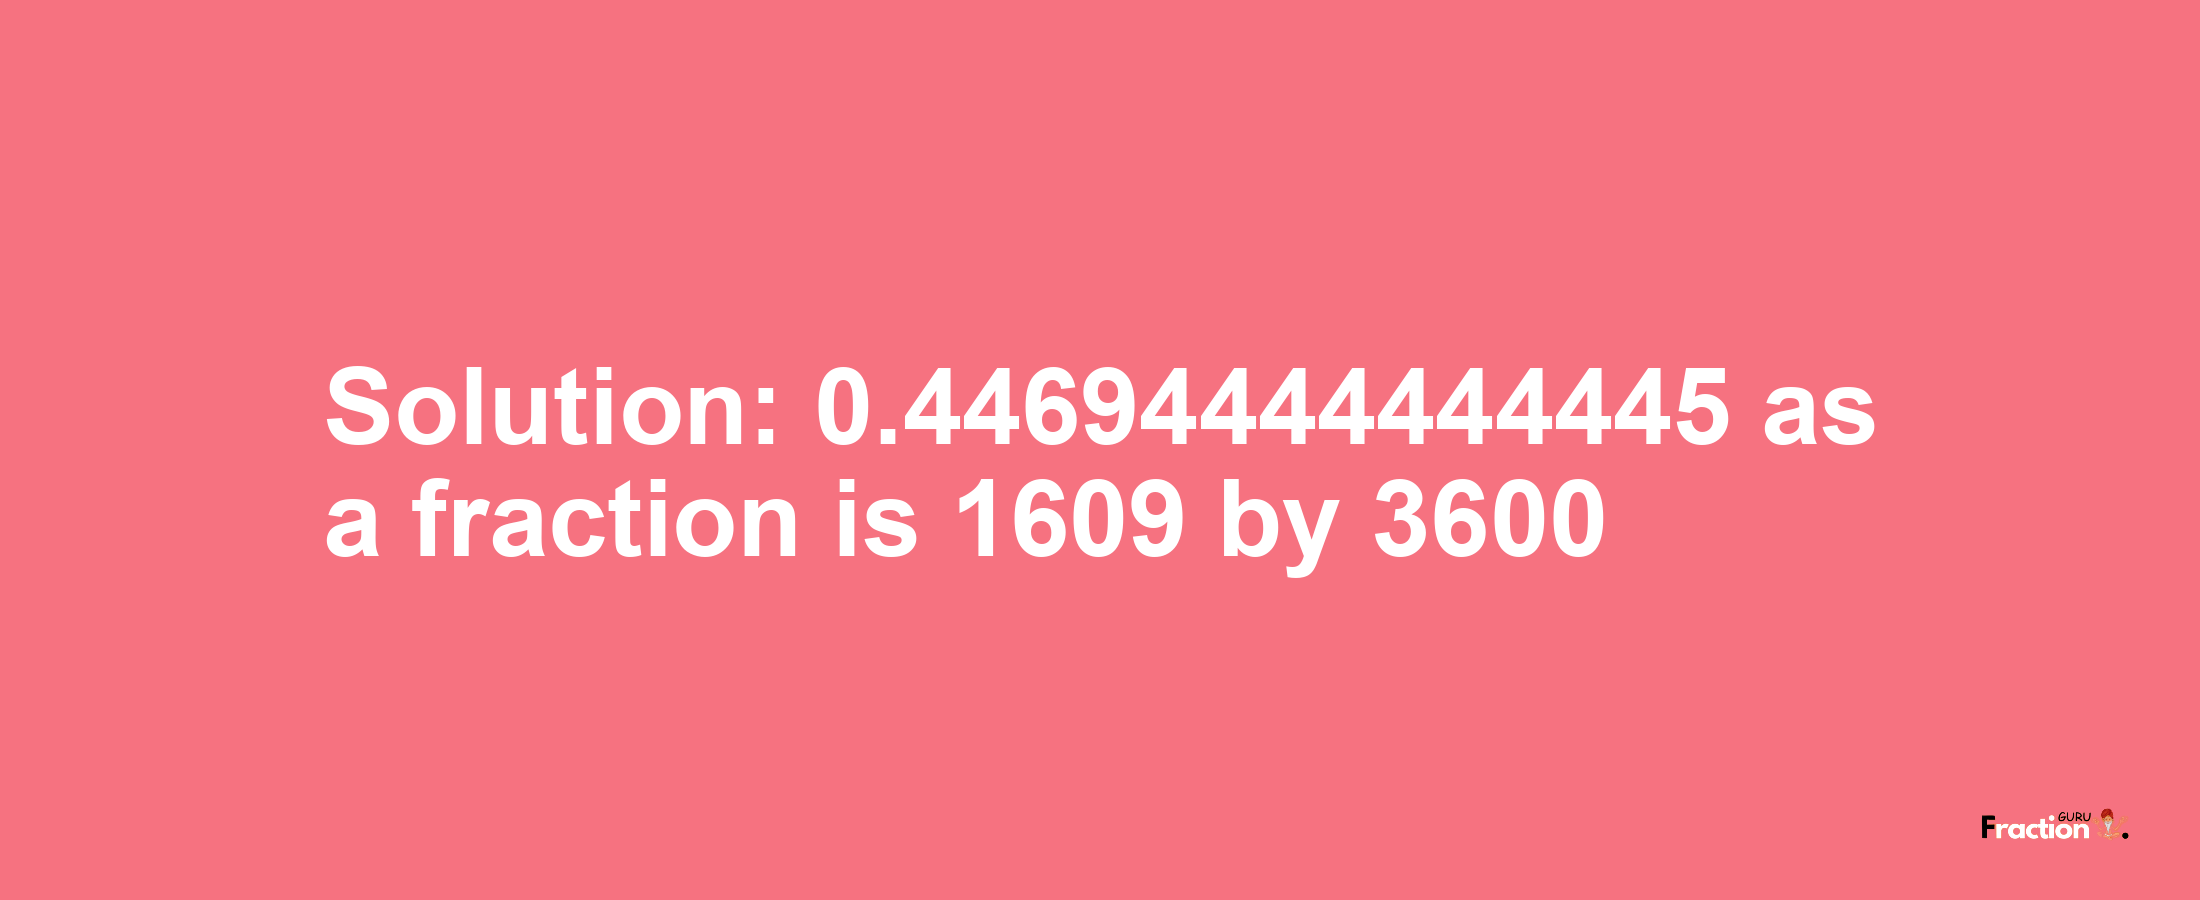 Solution:0.44694444444445 as a fraction is 1609/3600